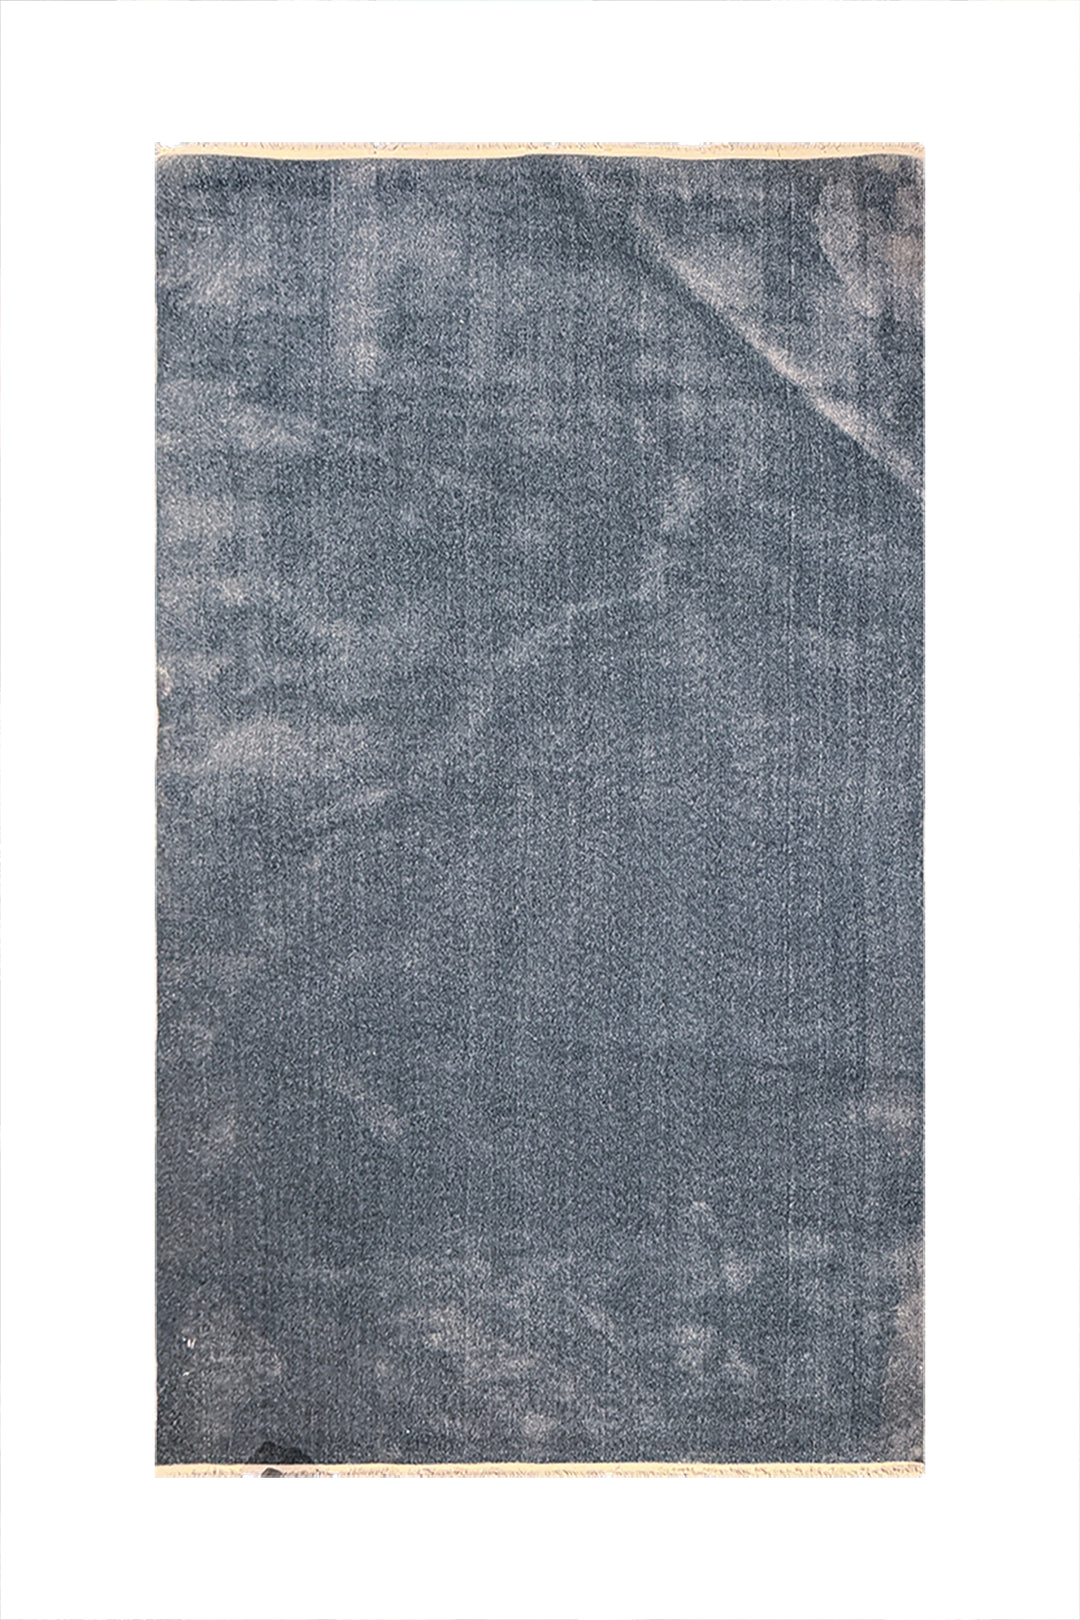 Turkish Modern Festival WD Rug - Blue - 5.2 x 7.5 FT - Superior Comfort, Modern & runners Style Accent Rugs